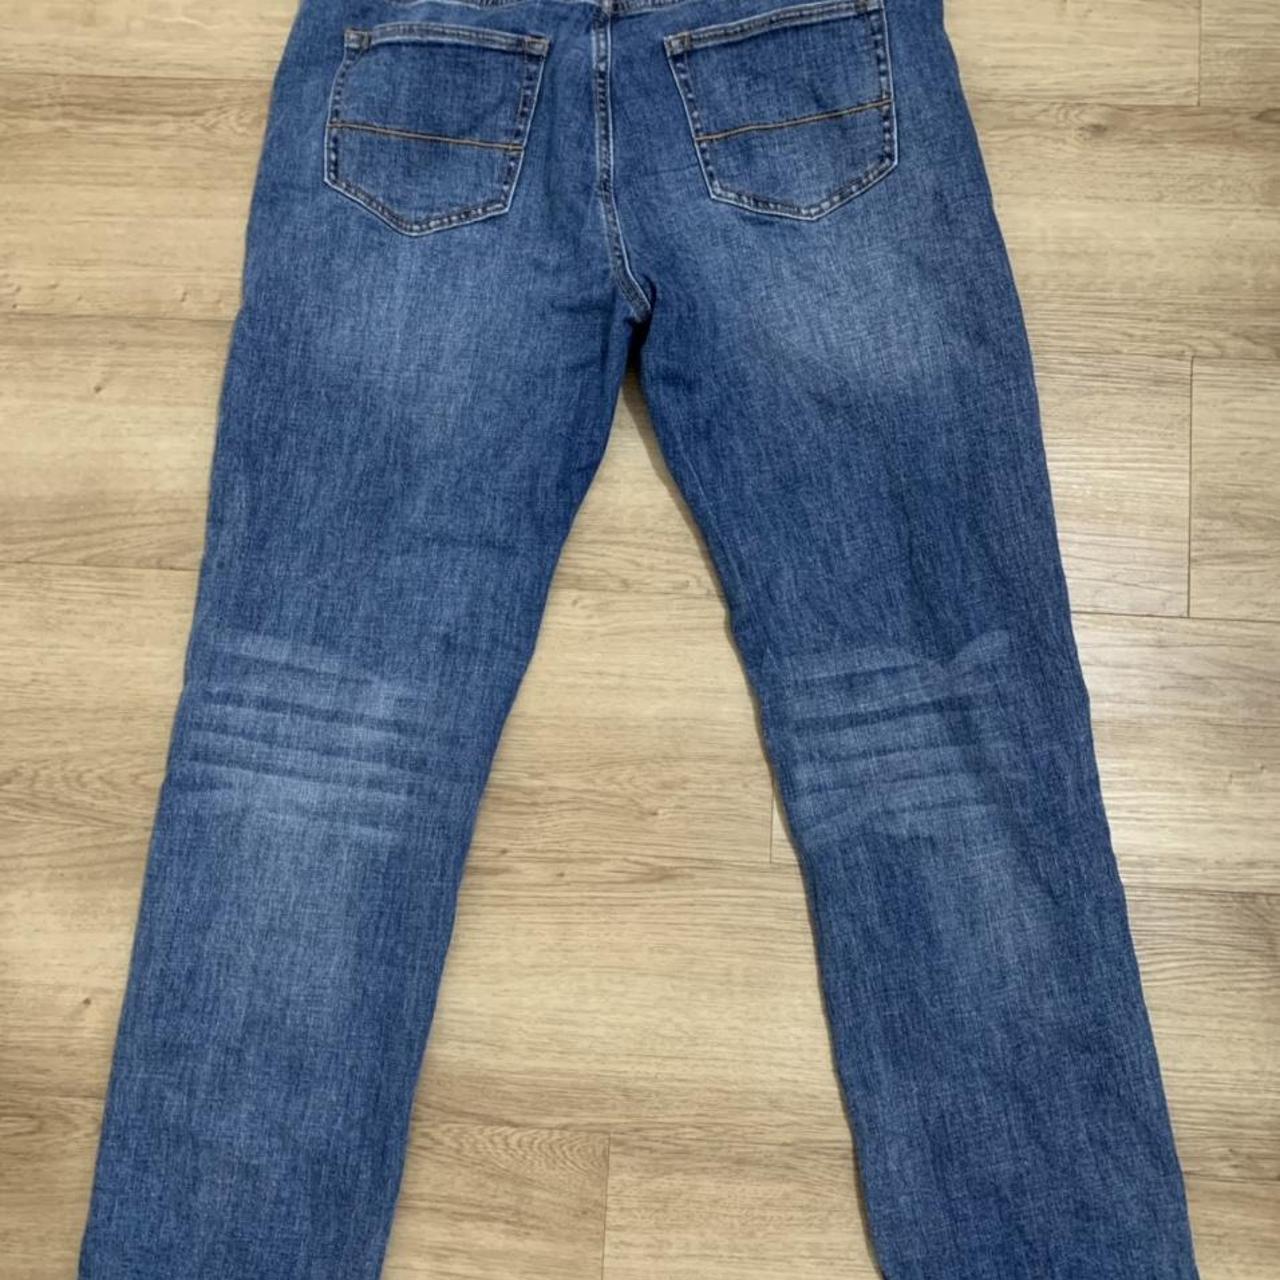 Trenery straight leg jeans Size 14 Material: 93%... - Depop